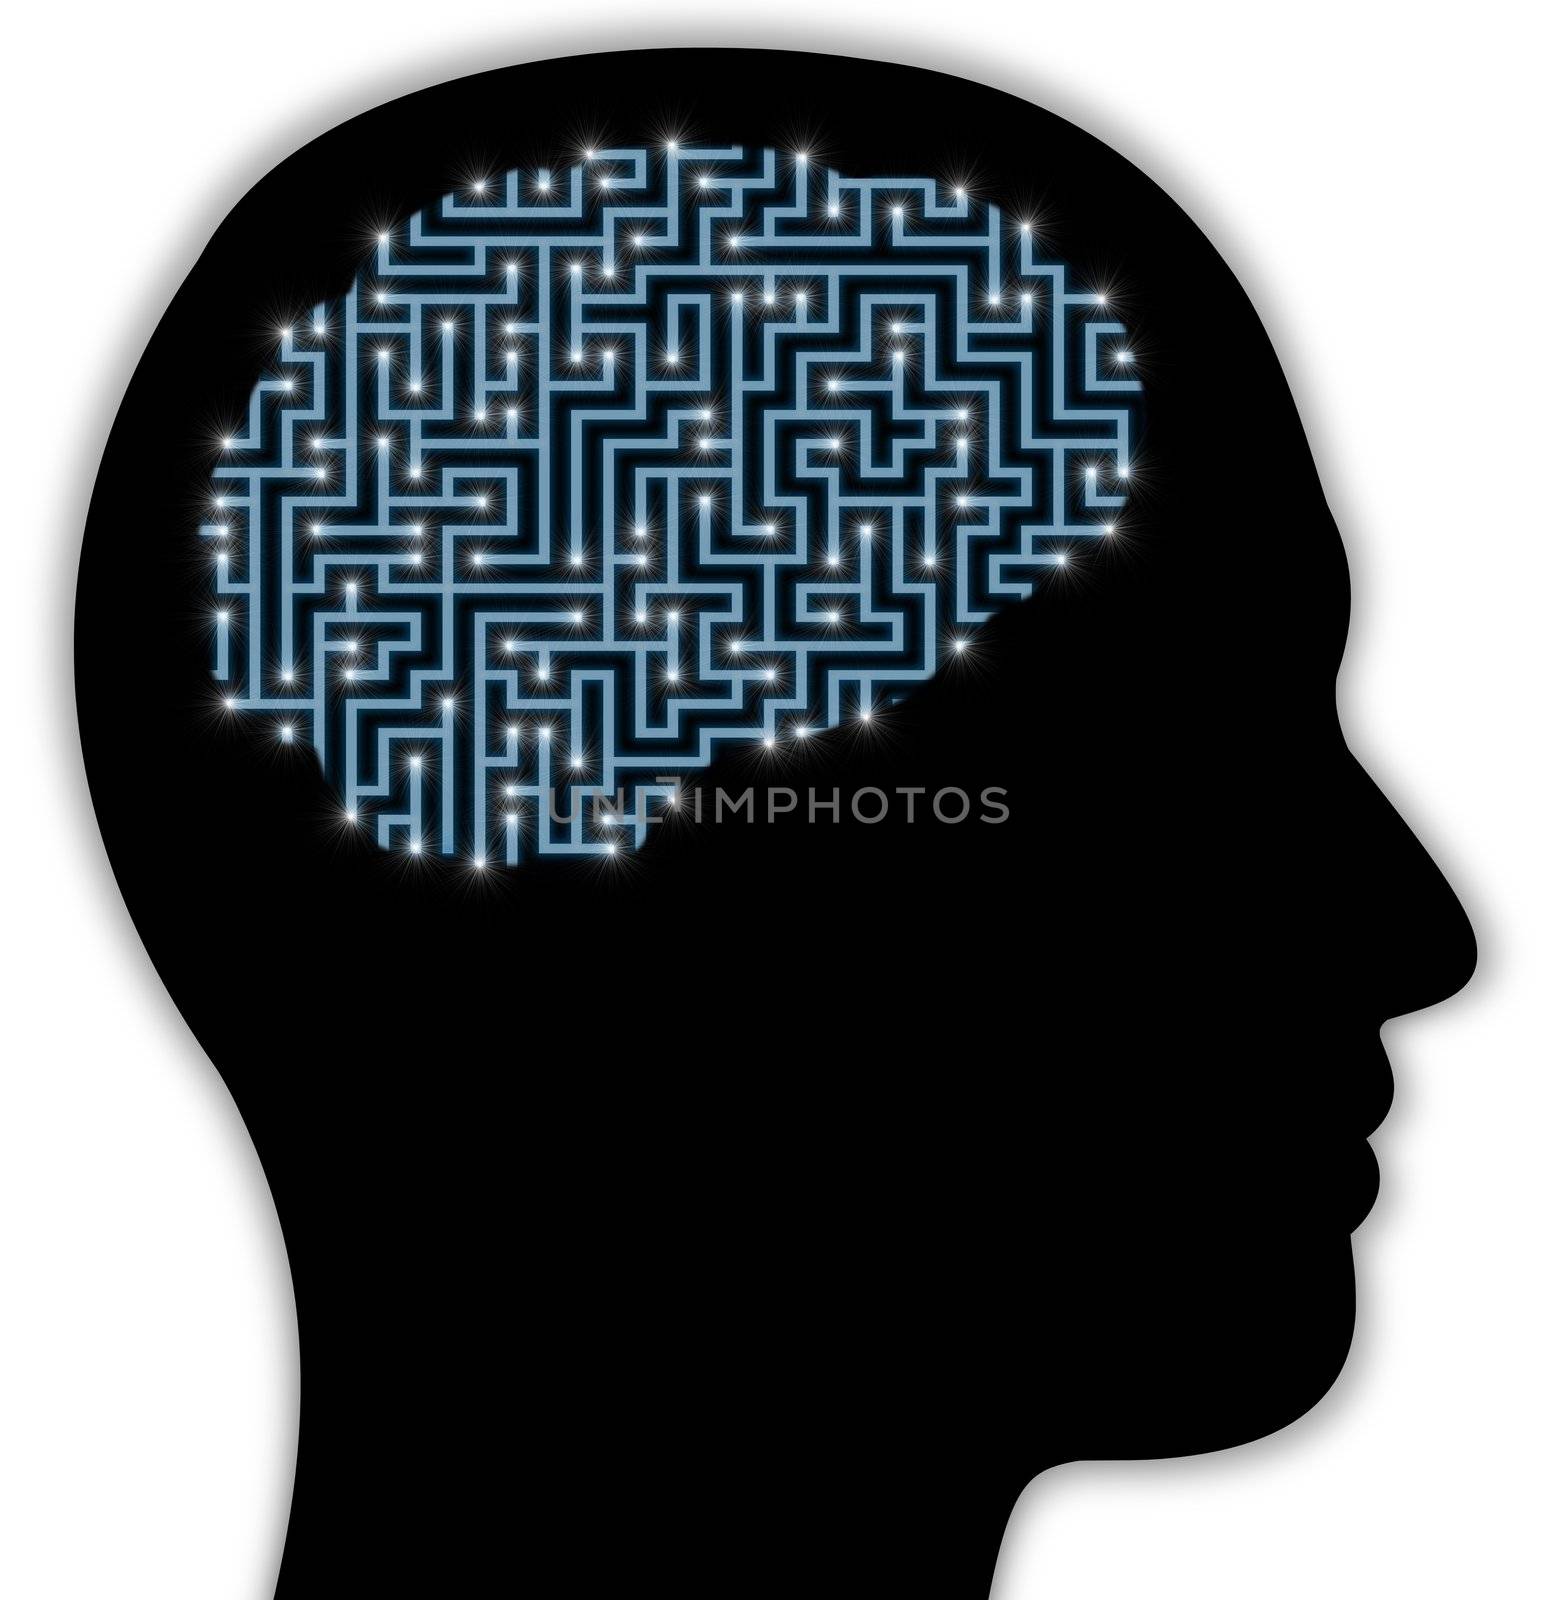 Illustrated side view of a persons head with a brain made of a maze with glowing neurons